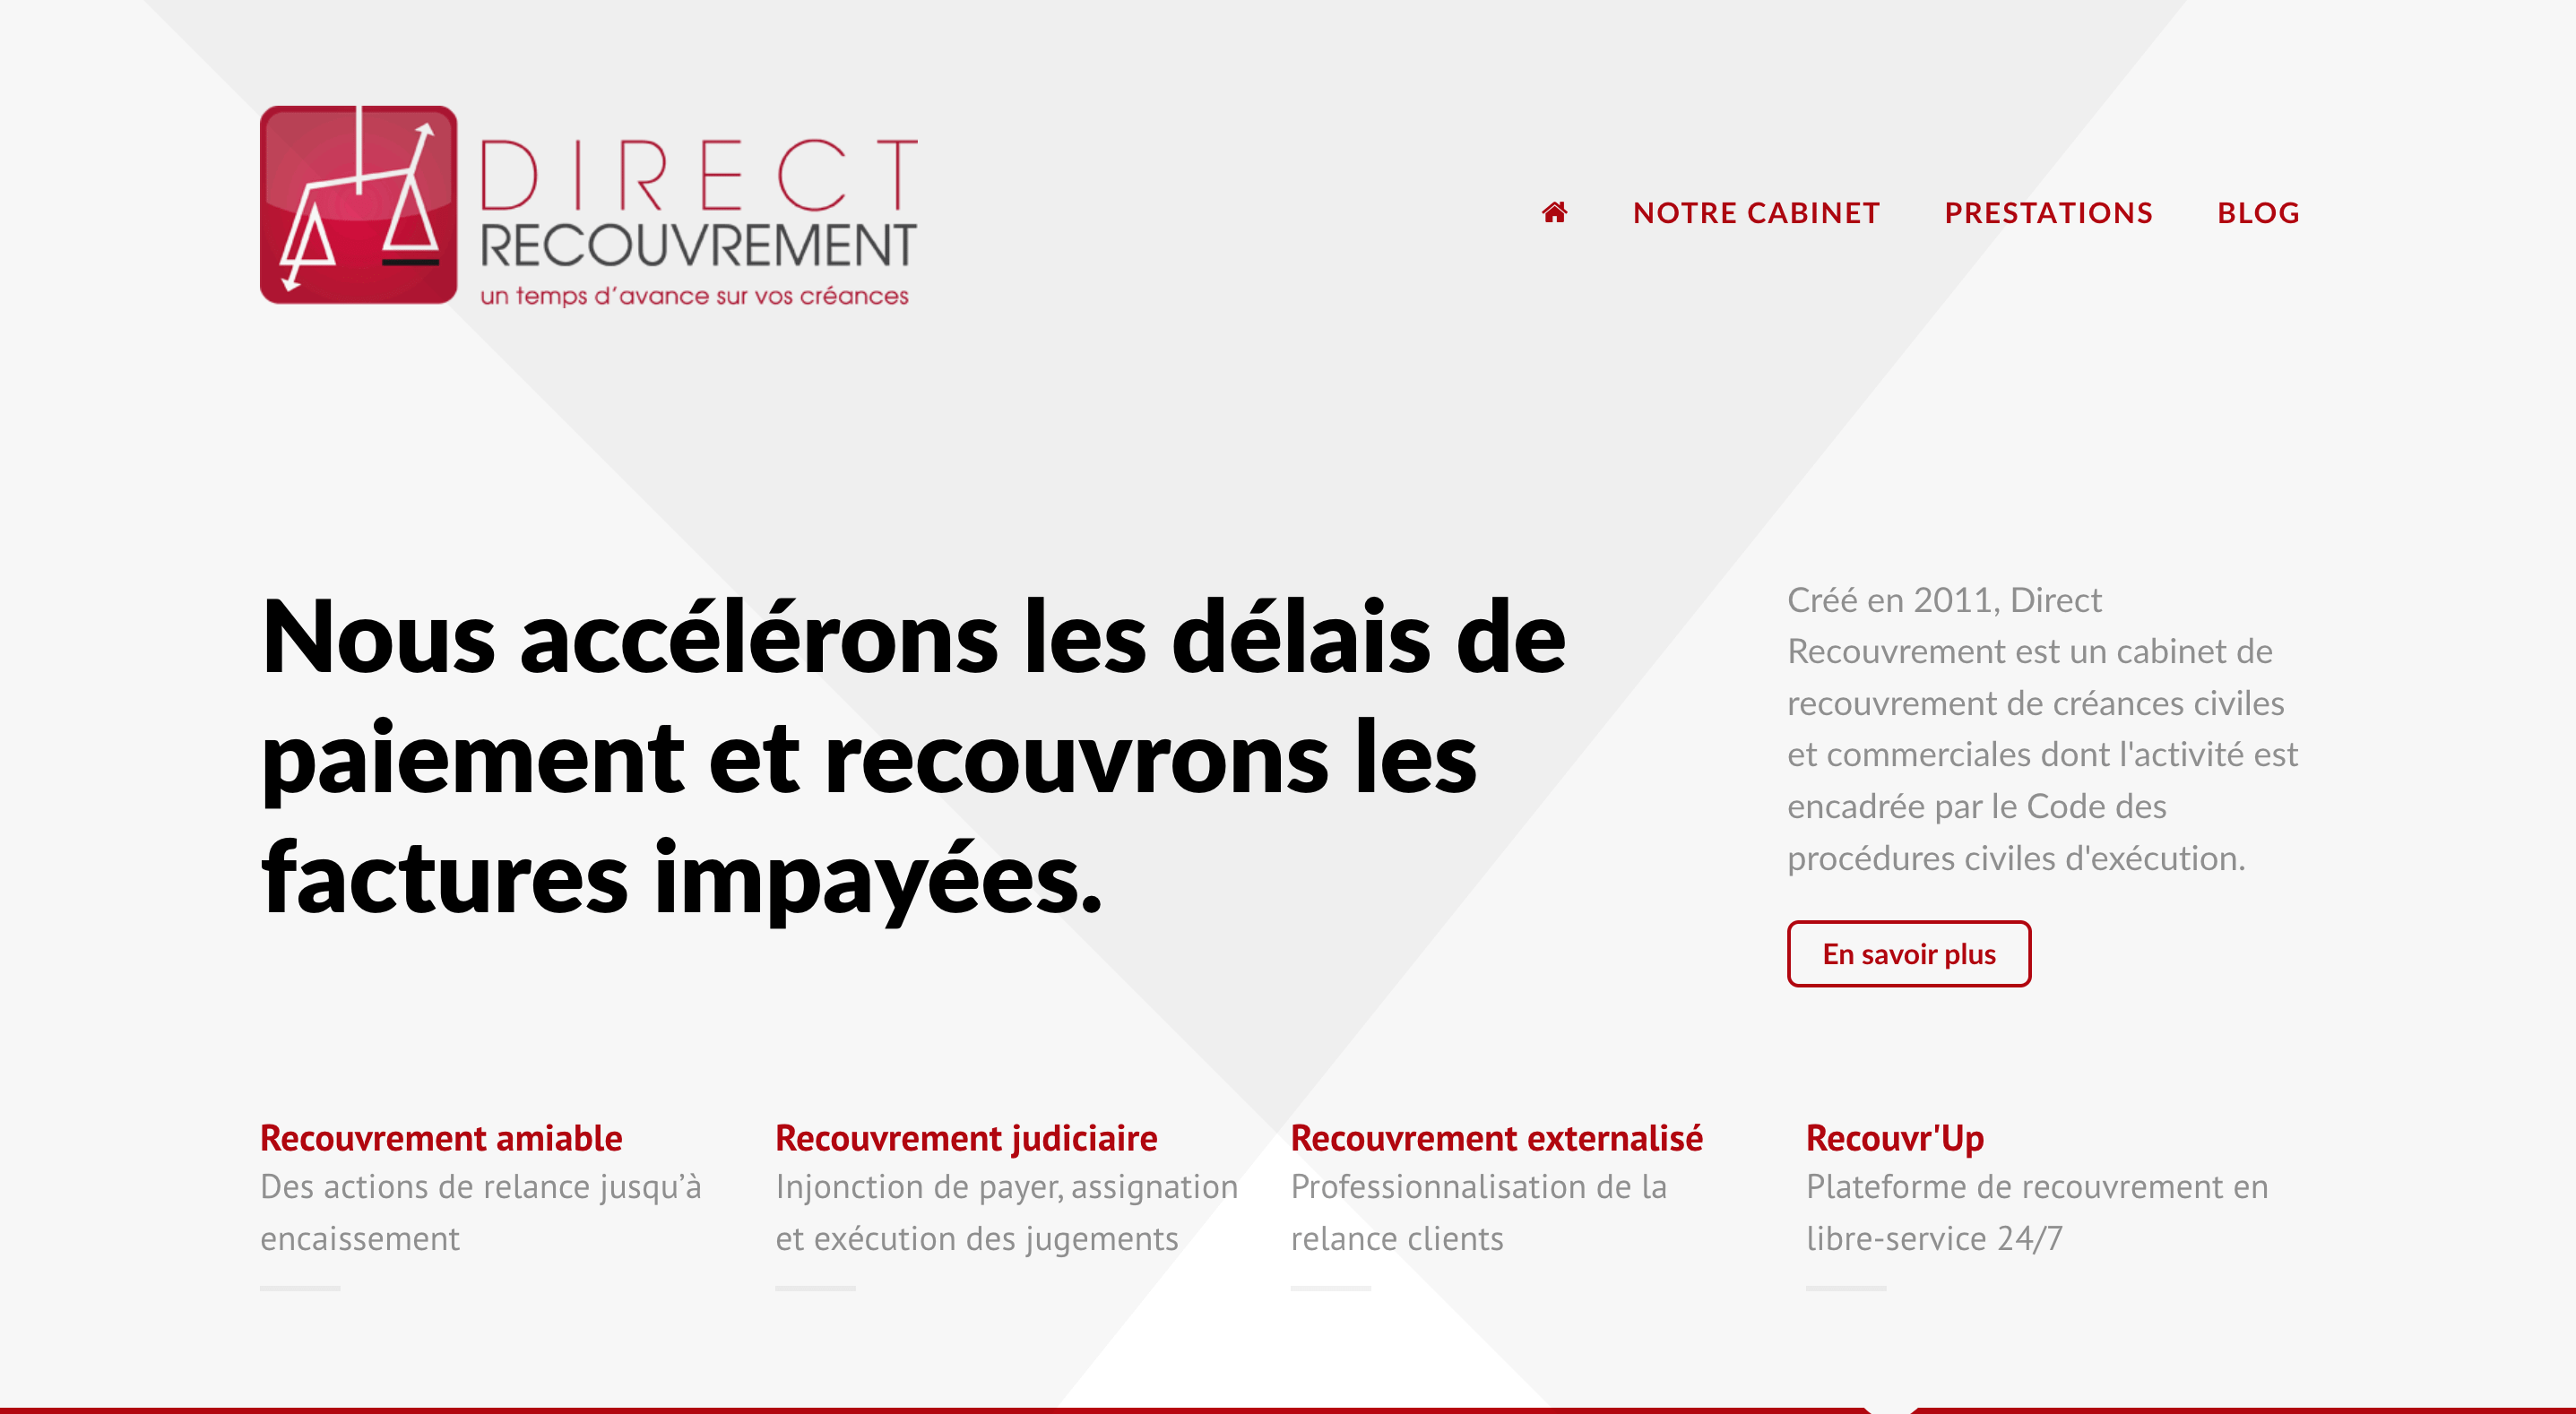 Direct Recouvrement